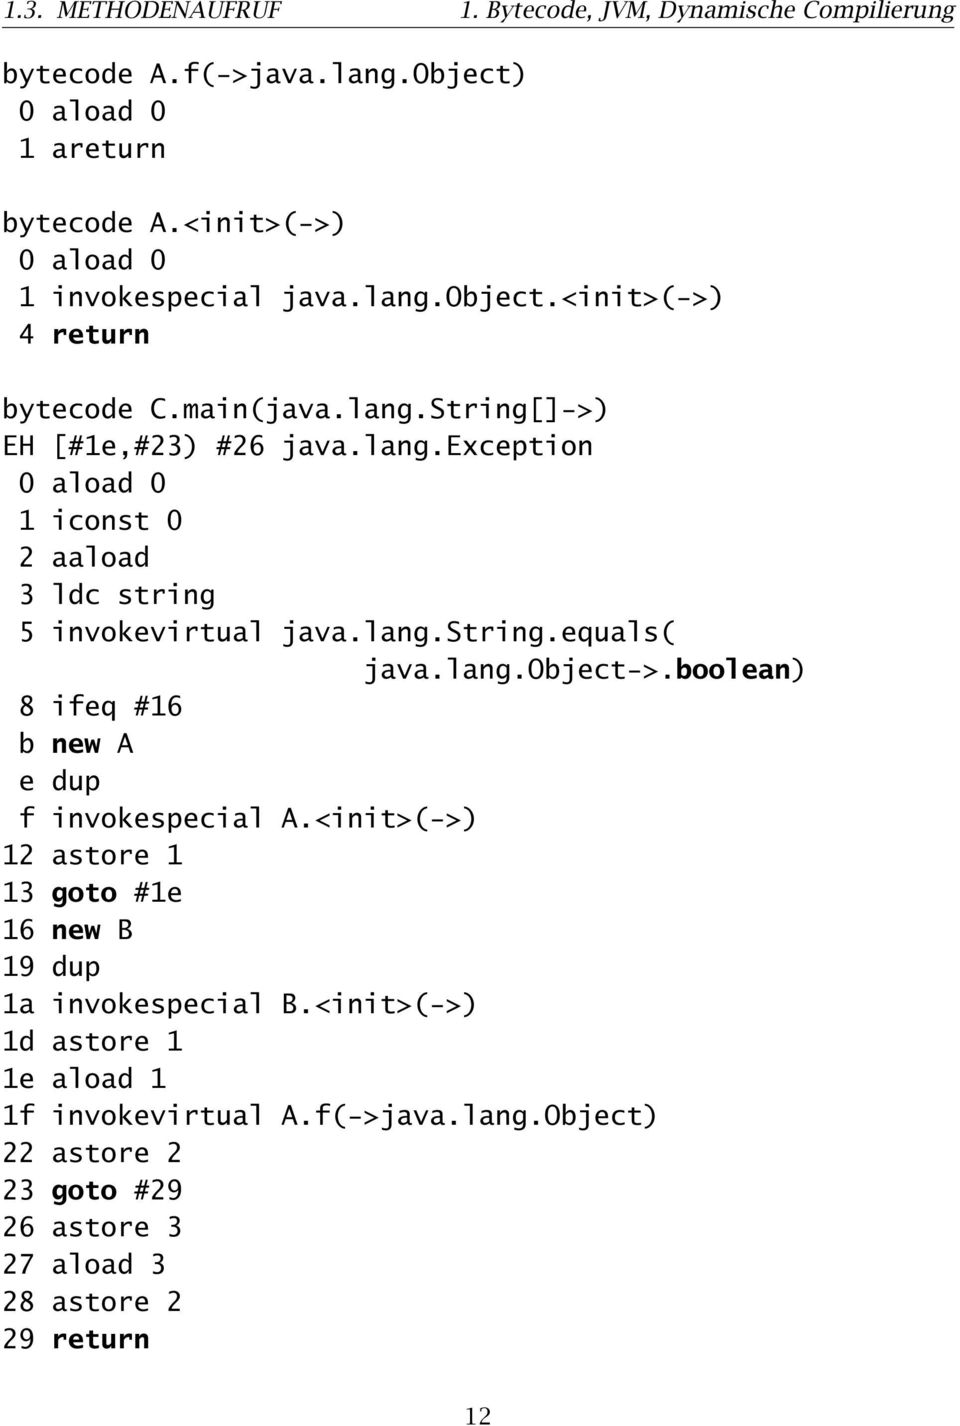 lang.string.equals( java.lang.object->.boolean) 8 ifeq #16 b new A e dup f invokespecial A.<init>(->) 12 astore 1 13 goto #1e 16 new B 19 dup 1a invokespecial B.